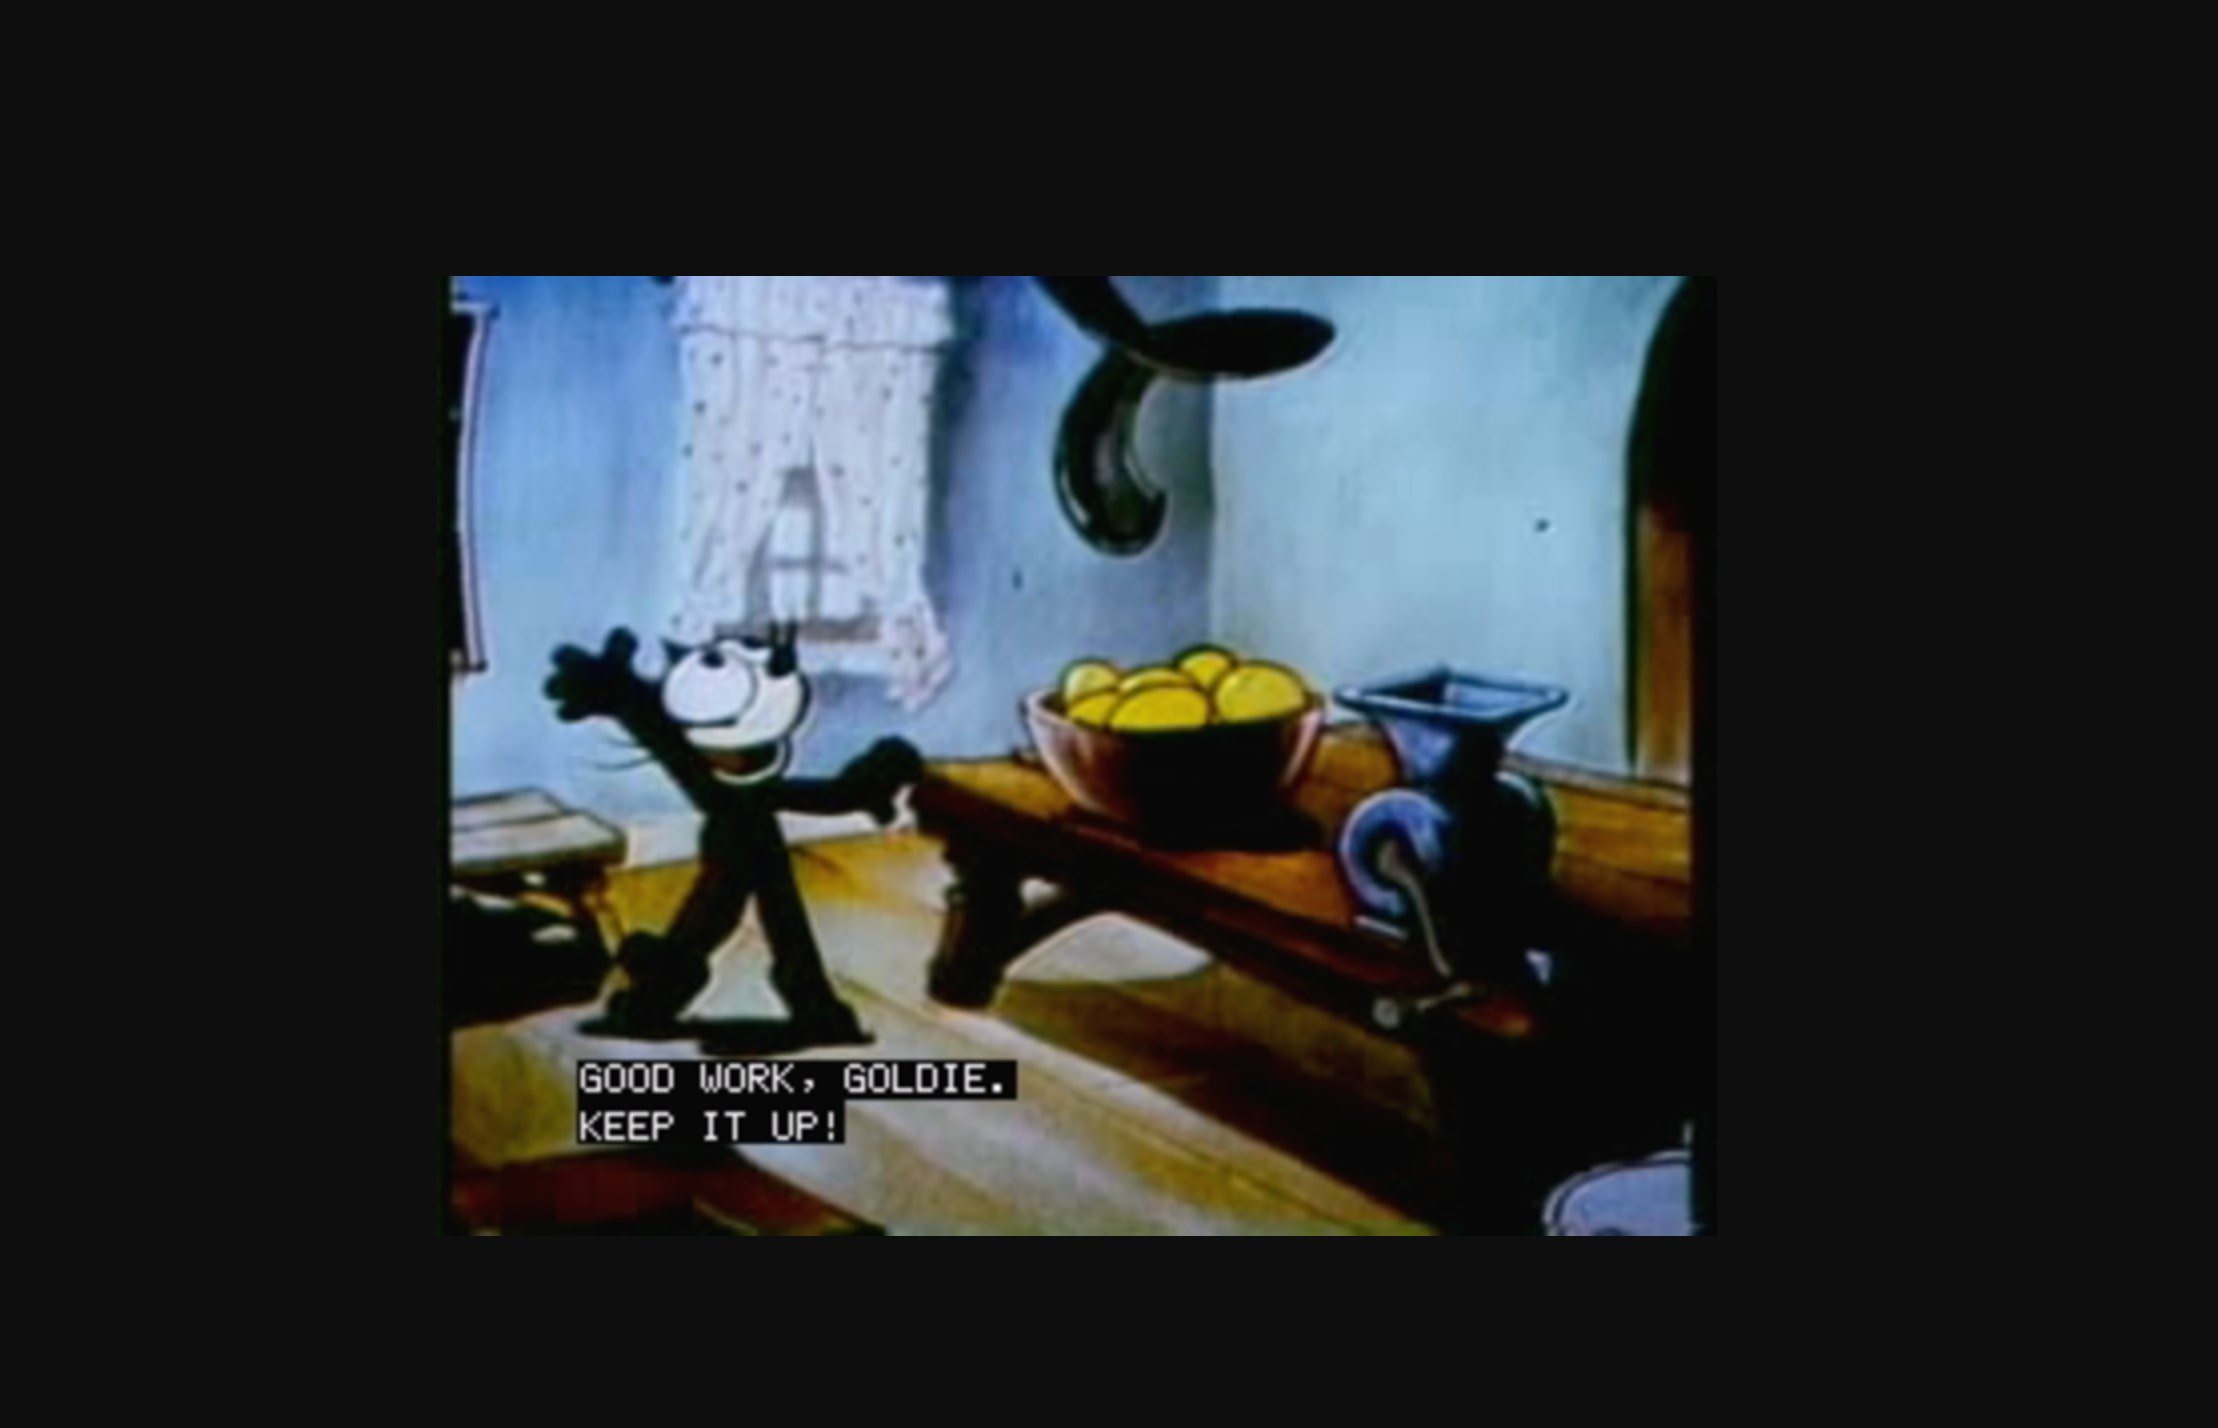 Felix the cat video with caption that reads "Good work, Goldie. Keep it up!"